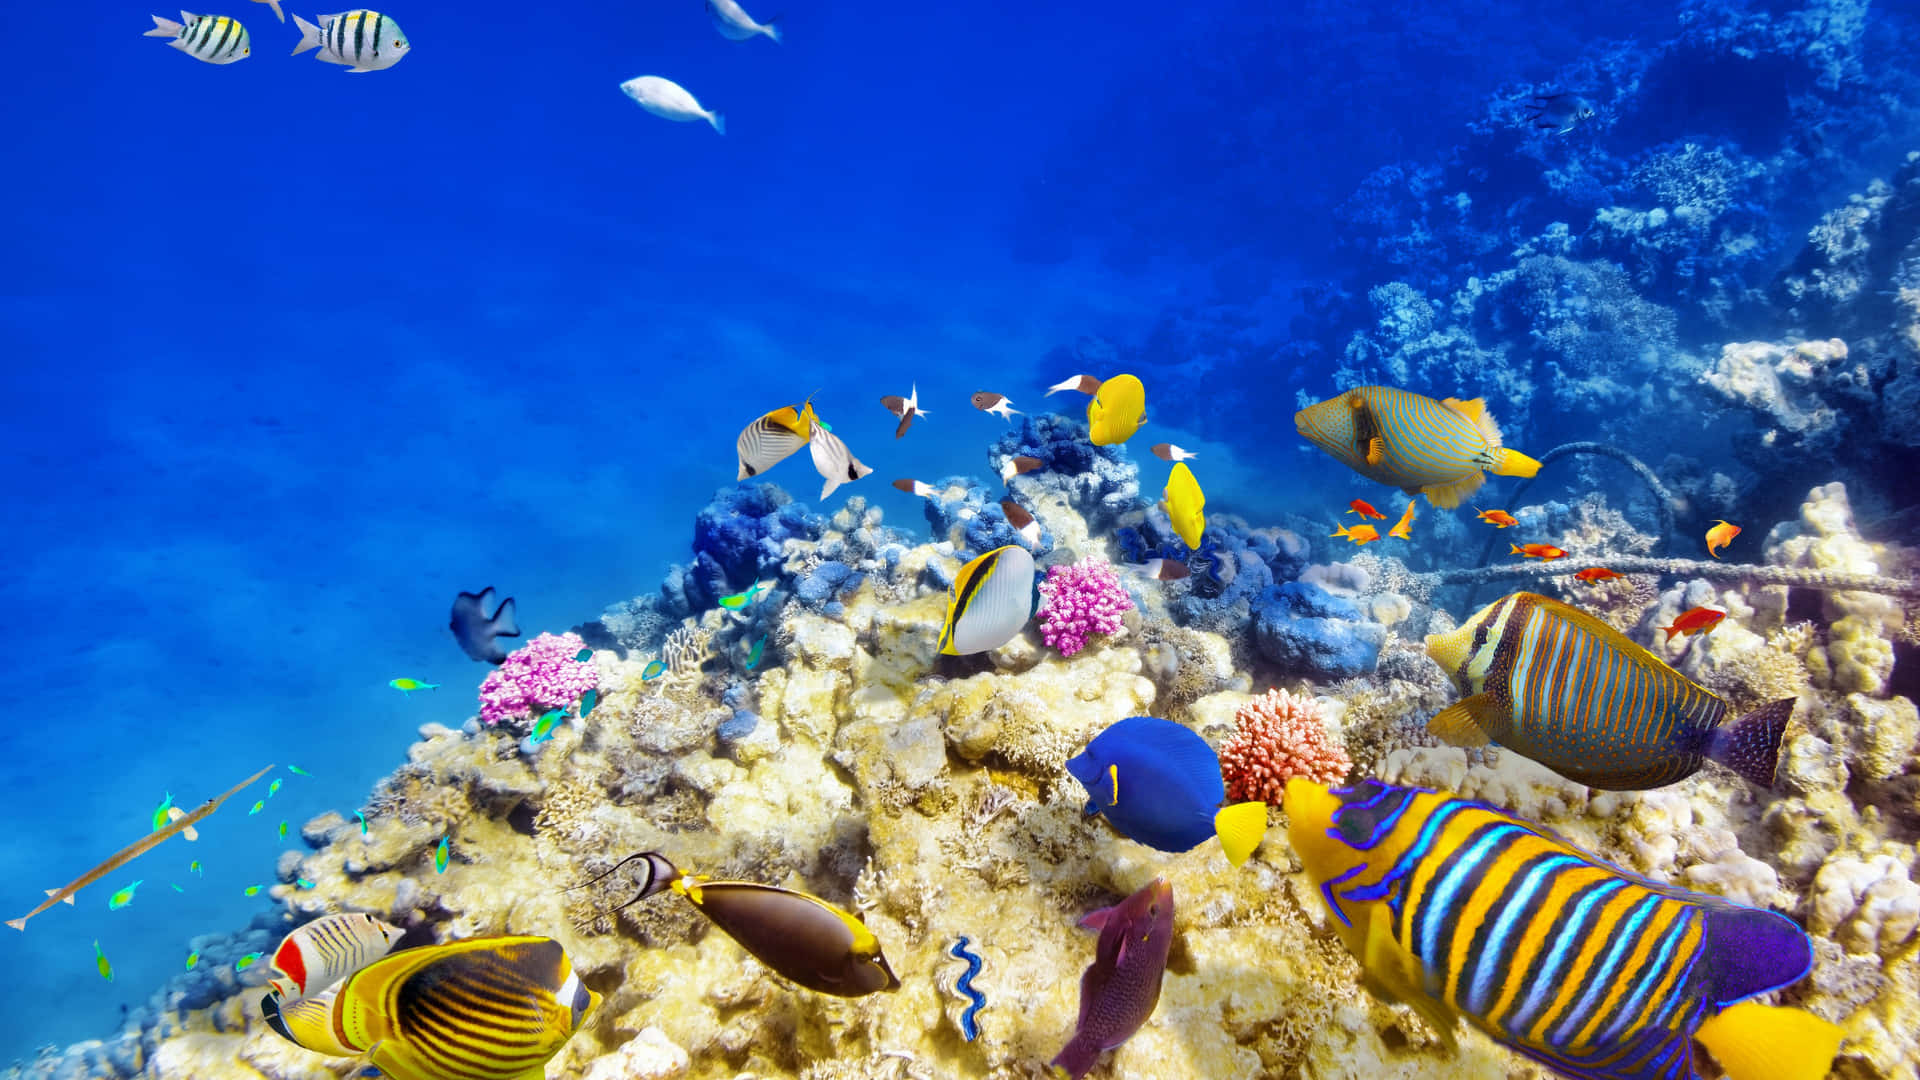 An underwater world of vibrant coral and sea life.